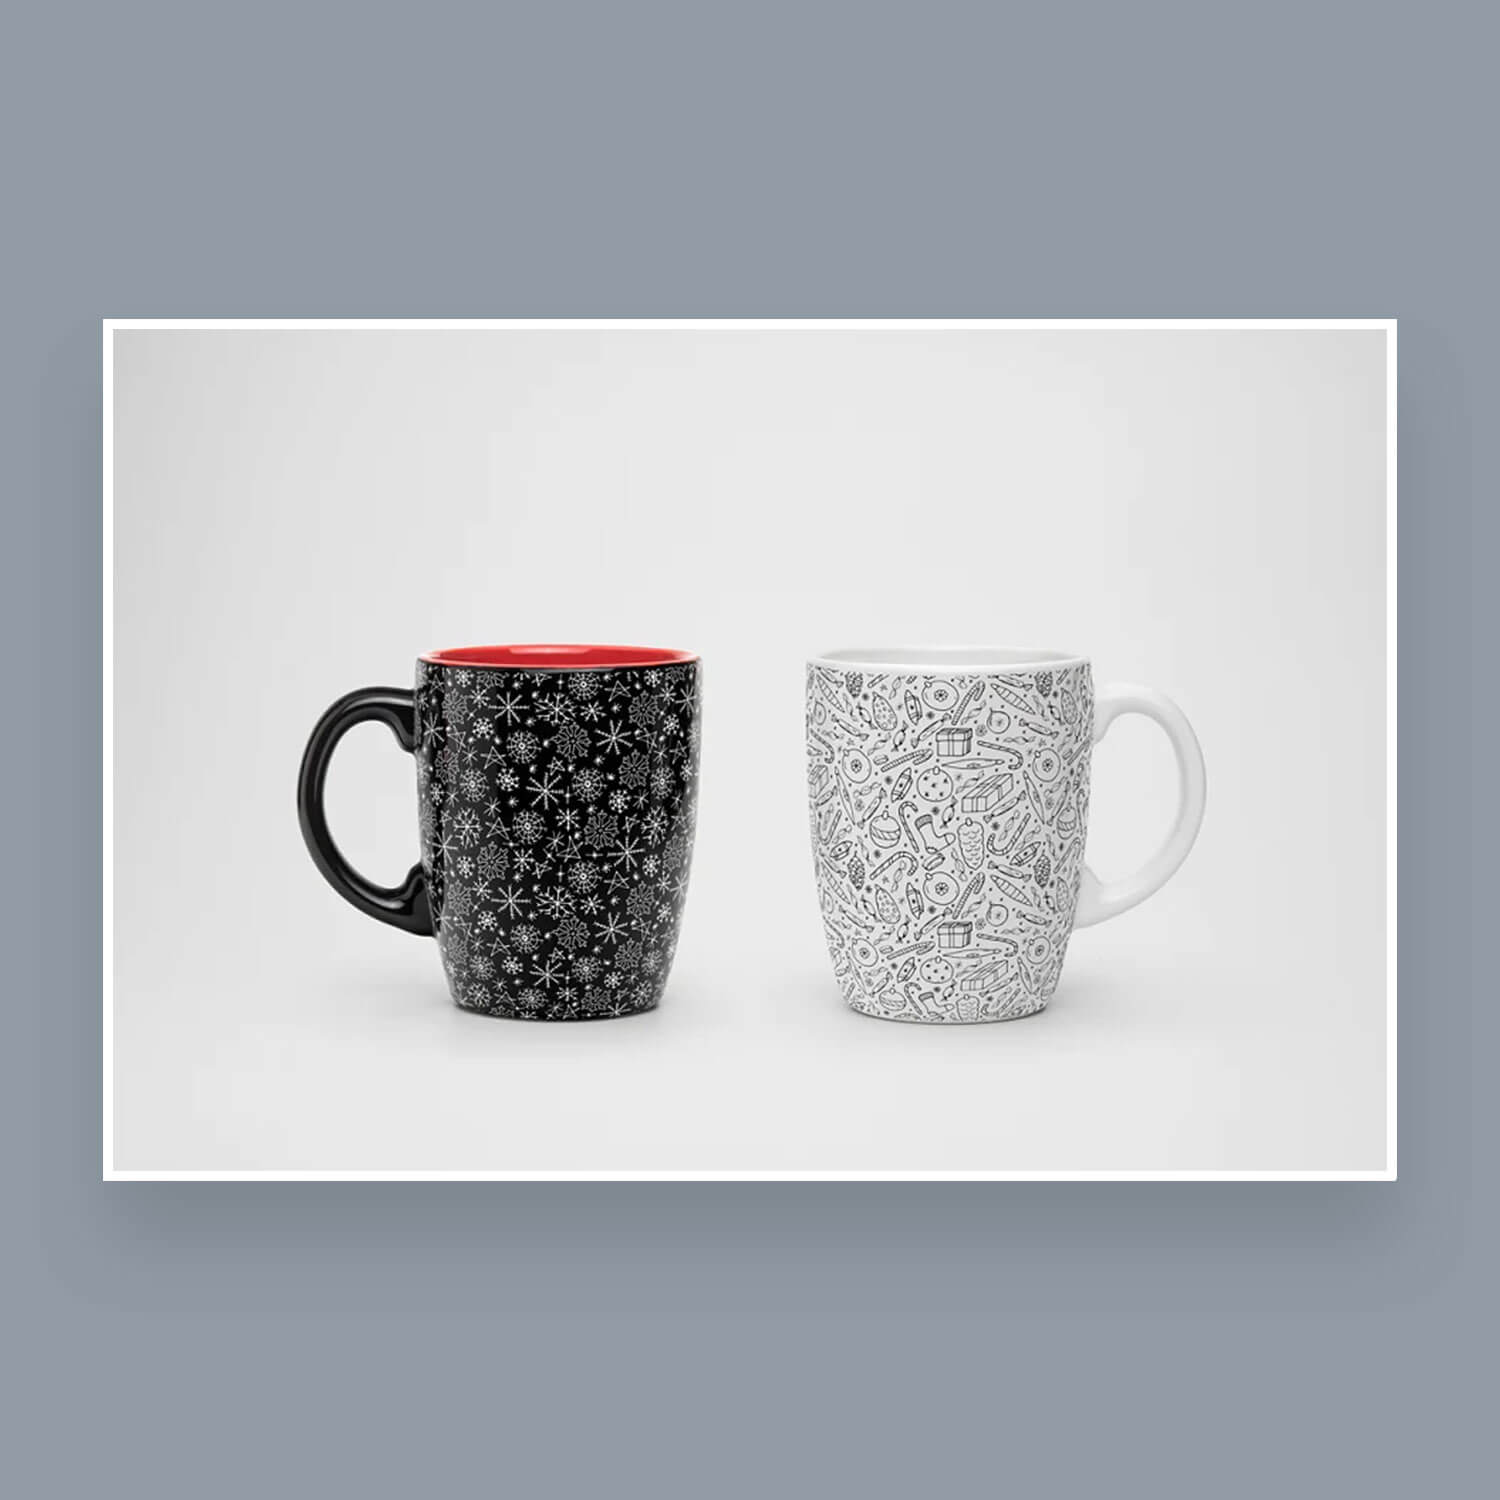 A black cup with snowflakes and a white cup with Christmas sweets and gifts.